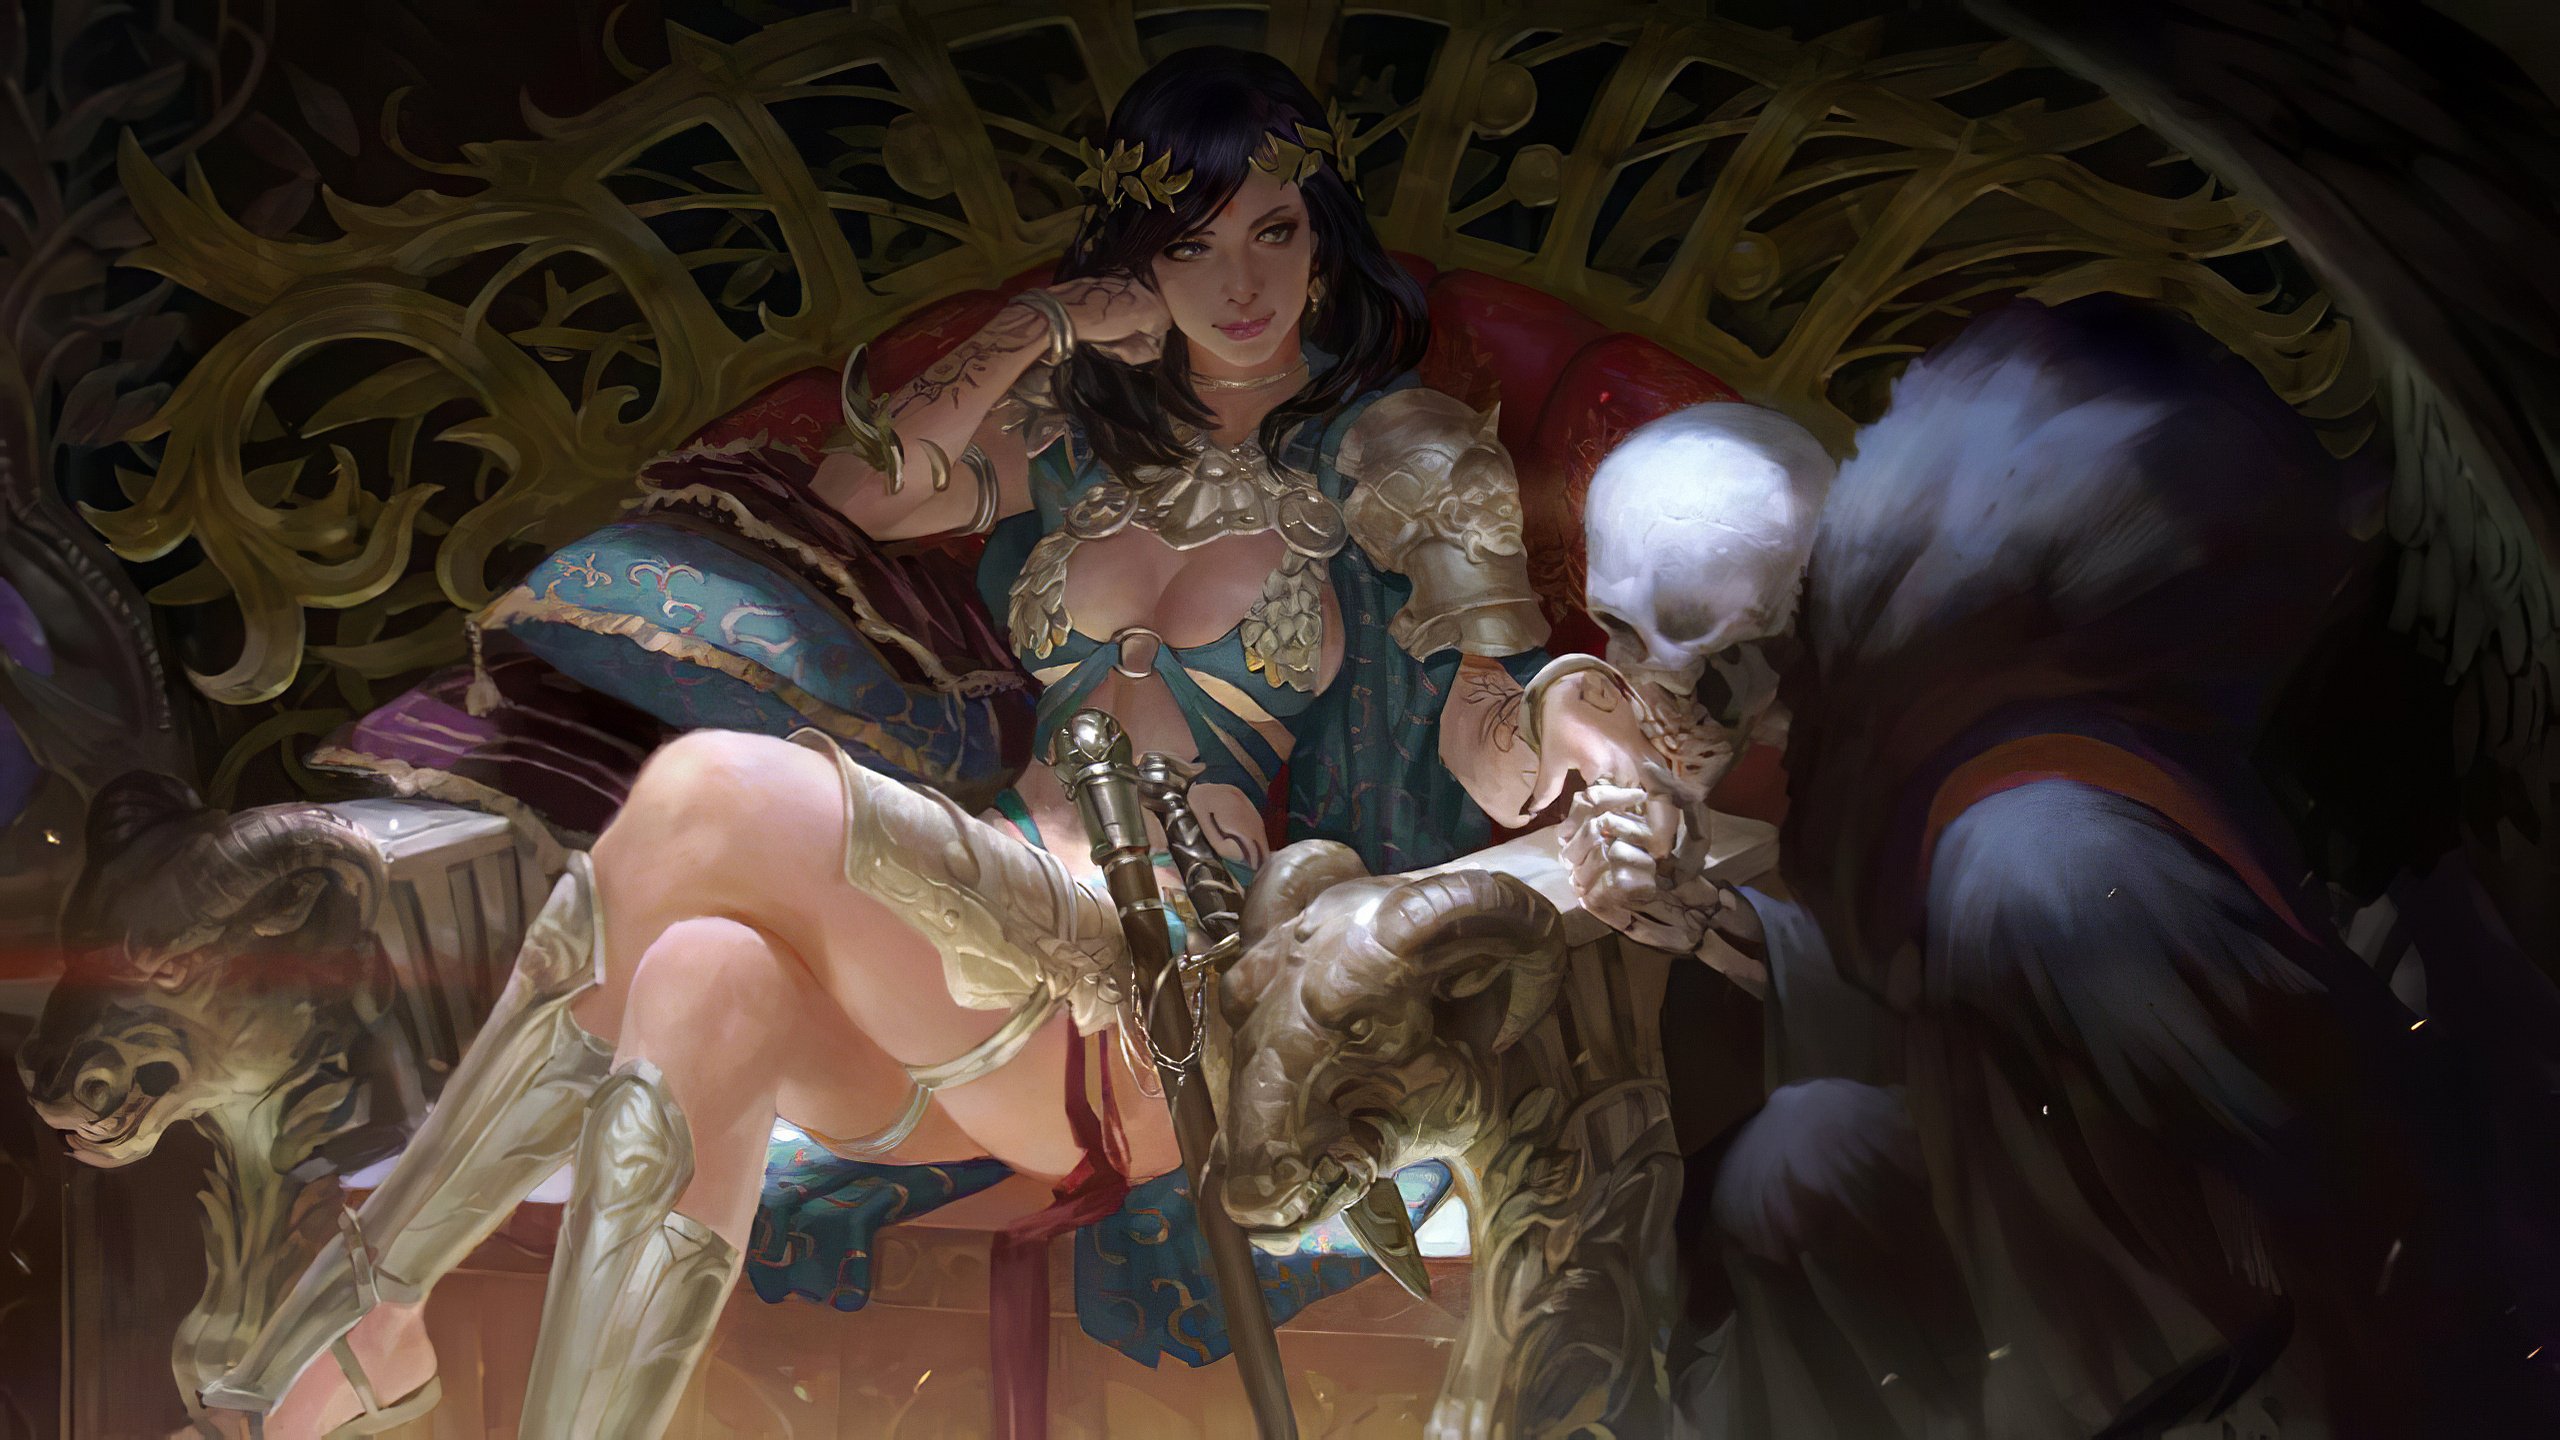 Kings throne maidens naked - 🧡 King's Throne: Game of Lust Get it for...